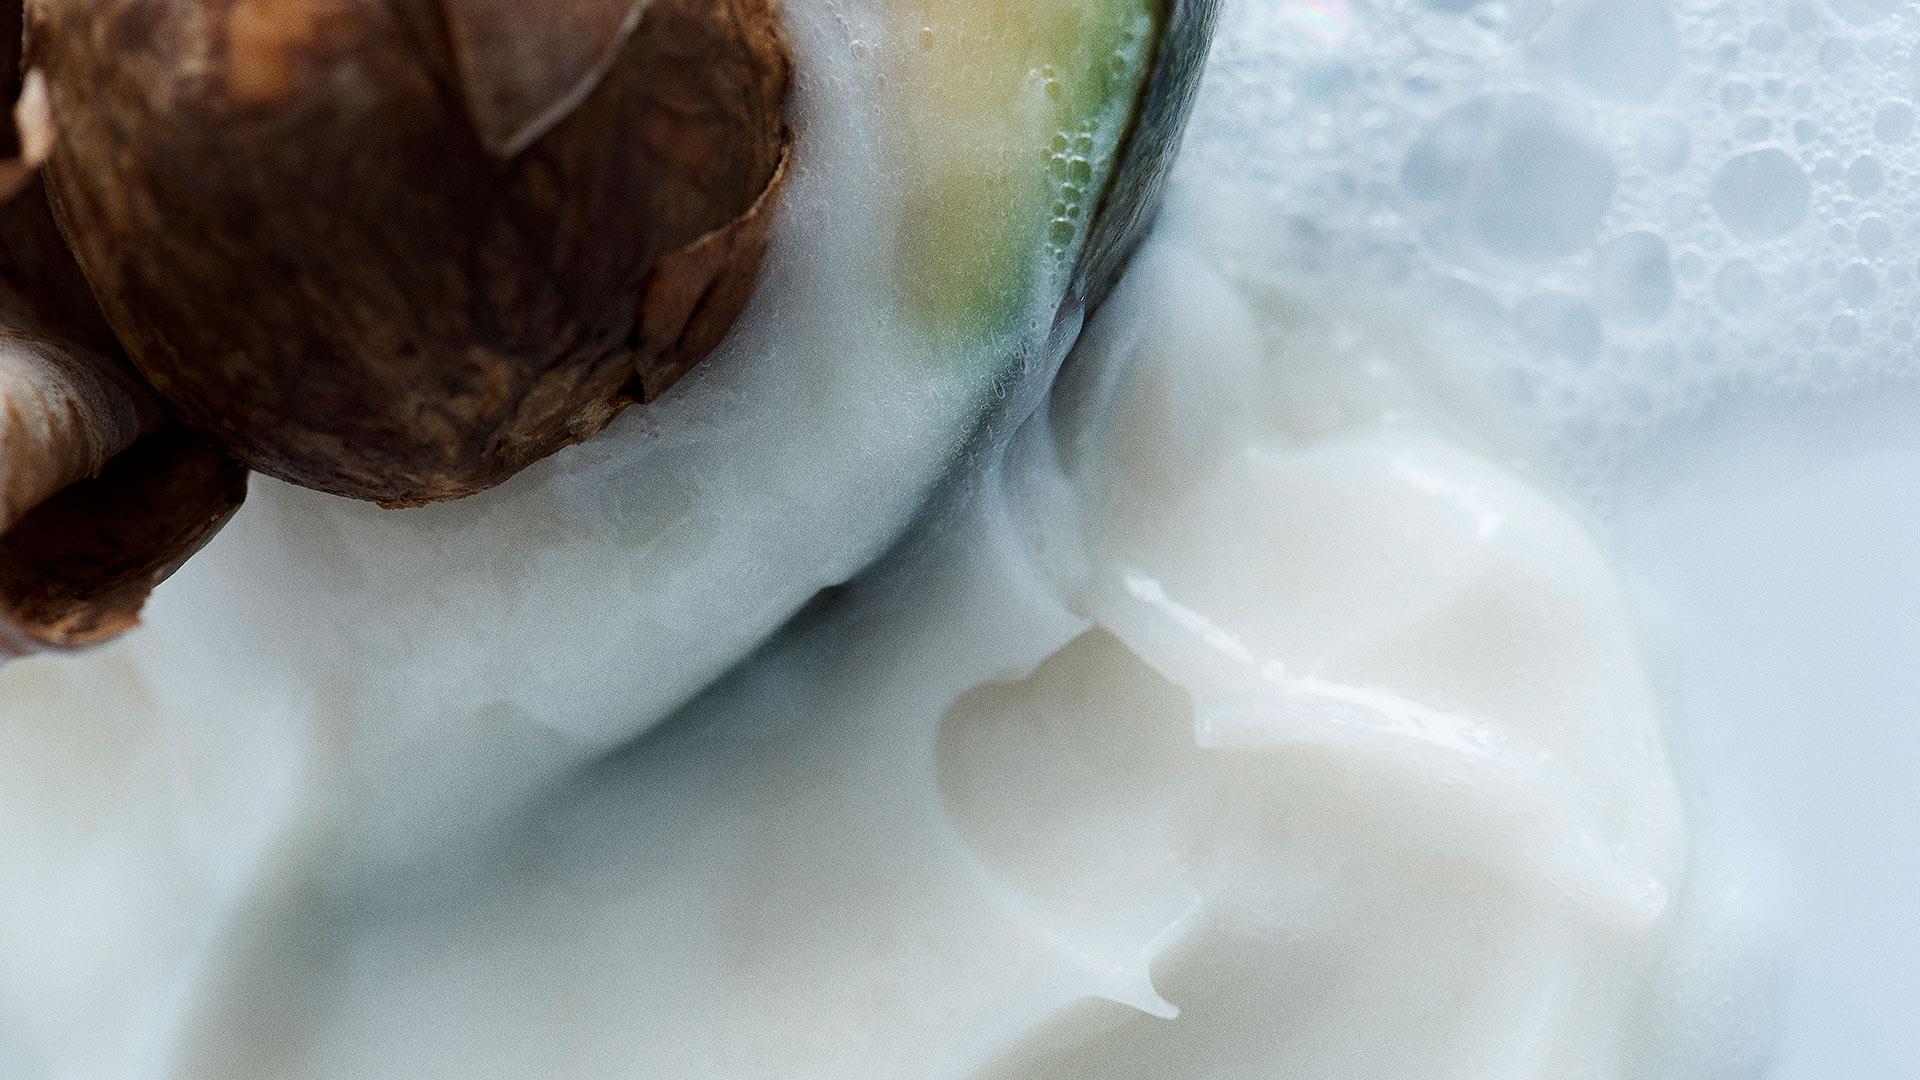 Partial image of Avocado with Harklinikken conditioner suds and liquid next to it